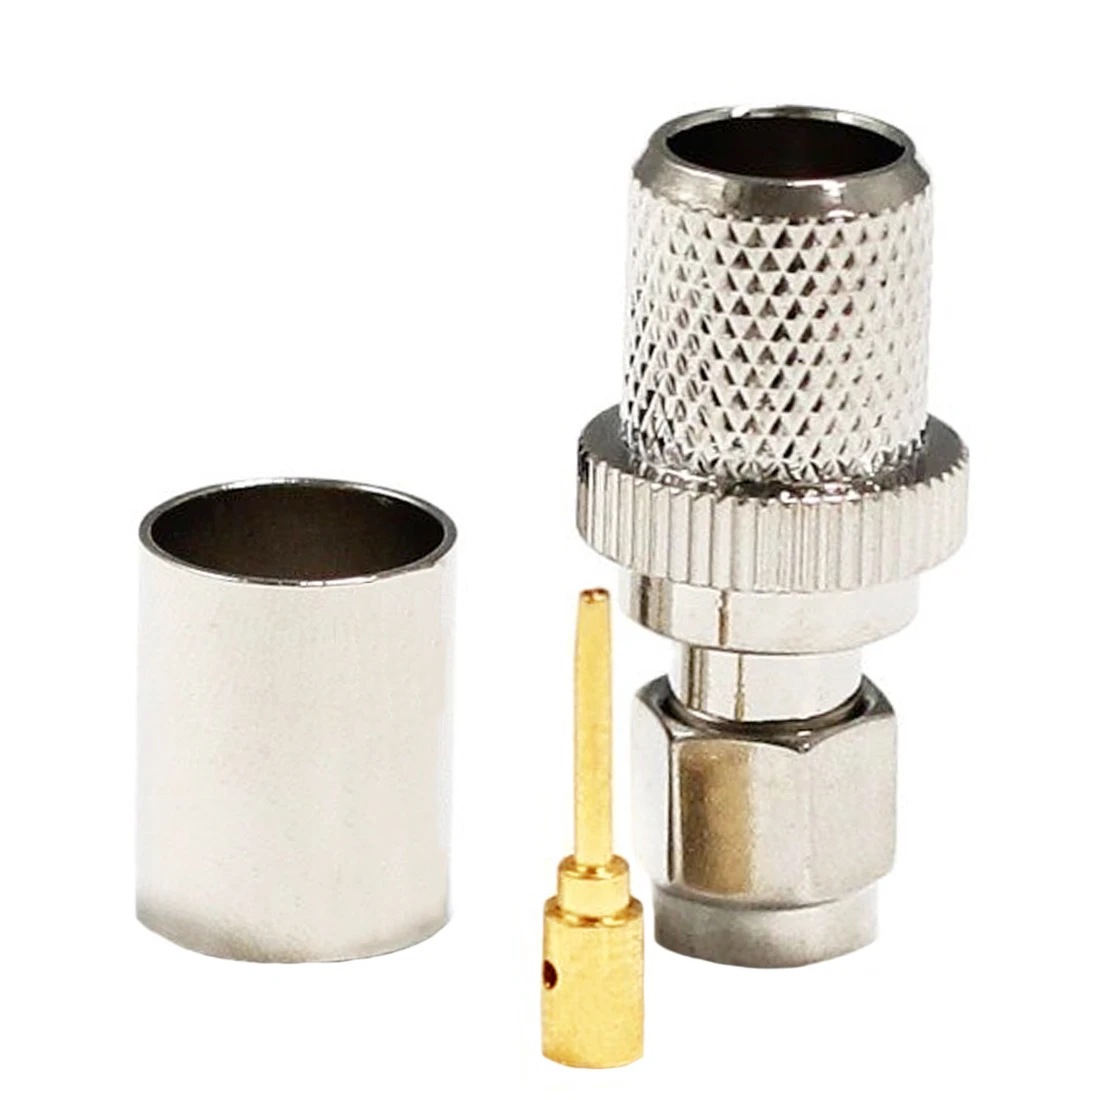 

1pc Reverse RP SMA Male Plug with Socket RF Coax Connector Crimp for RG8 RG213 LMR400 Cable Straight Nickelplated Wholesale